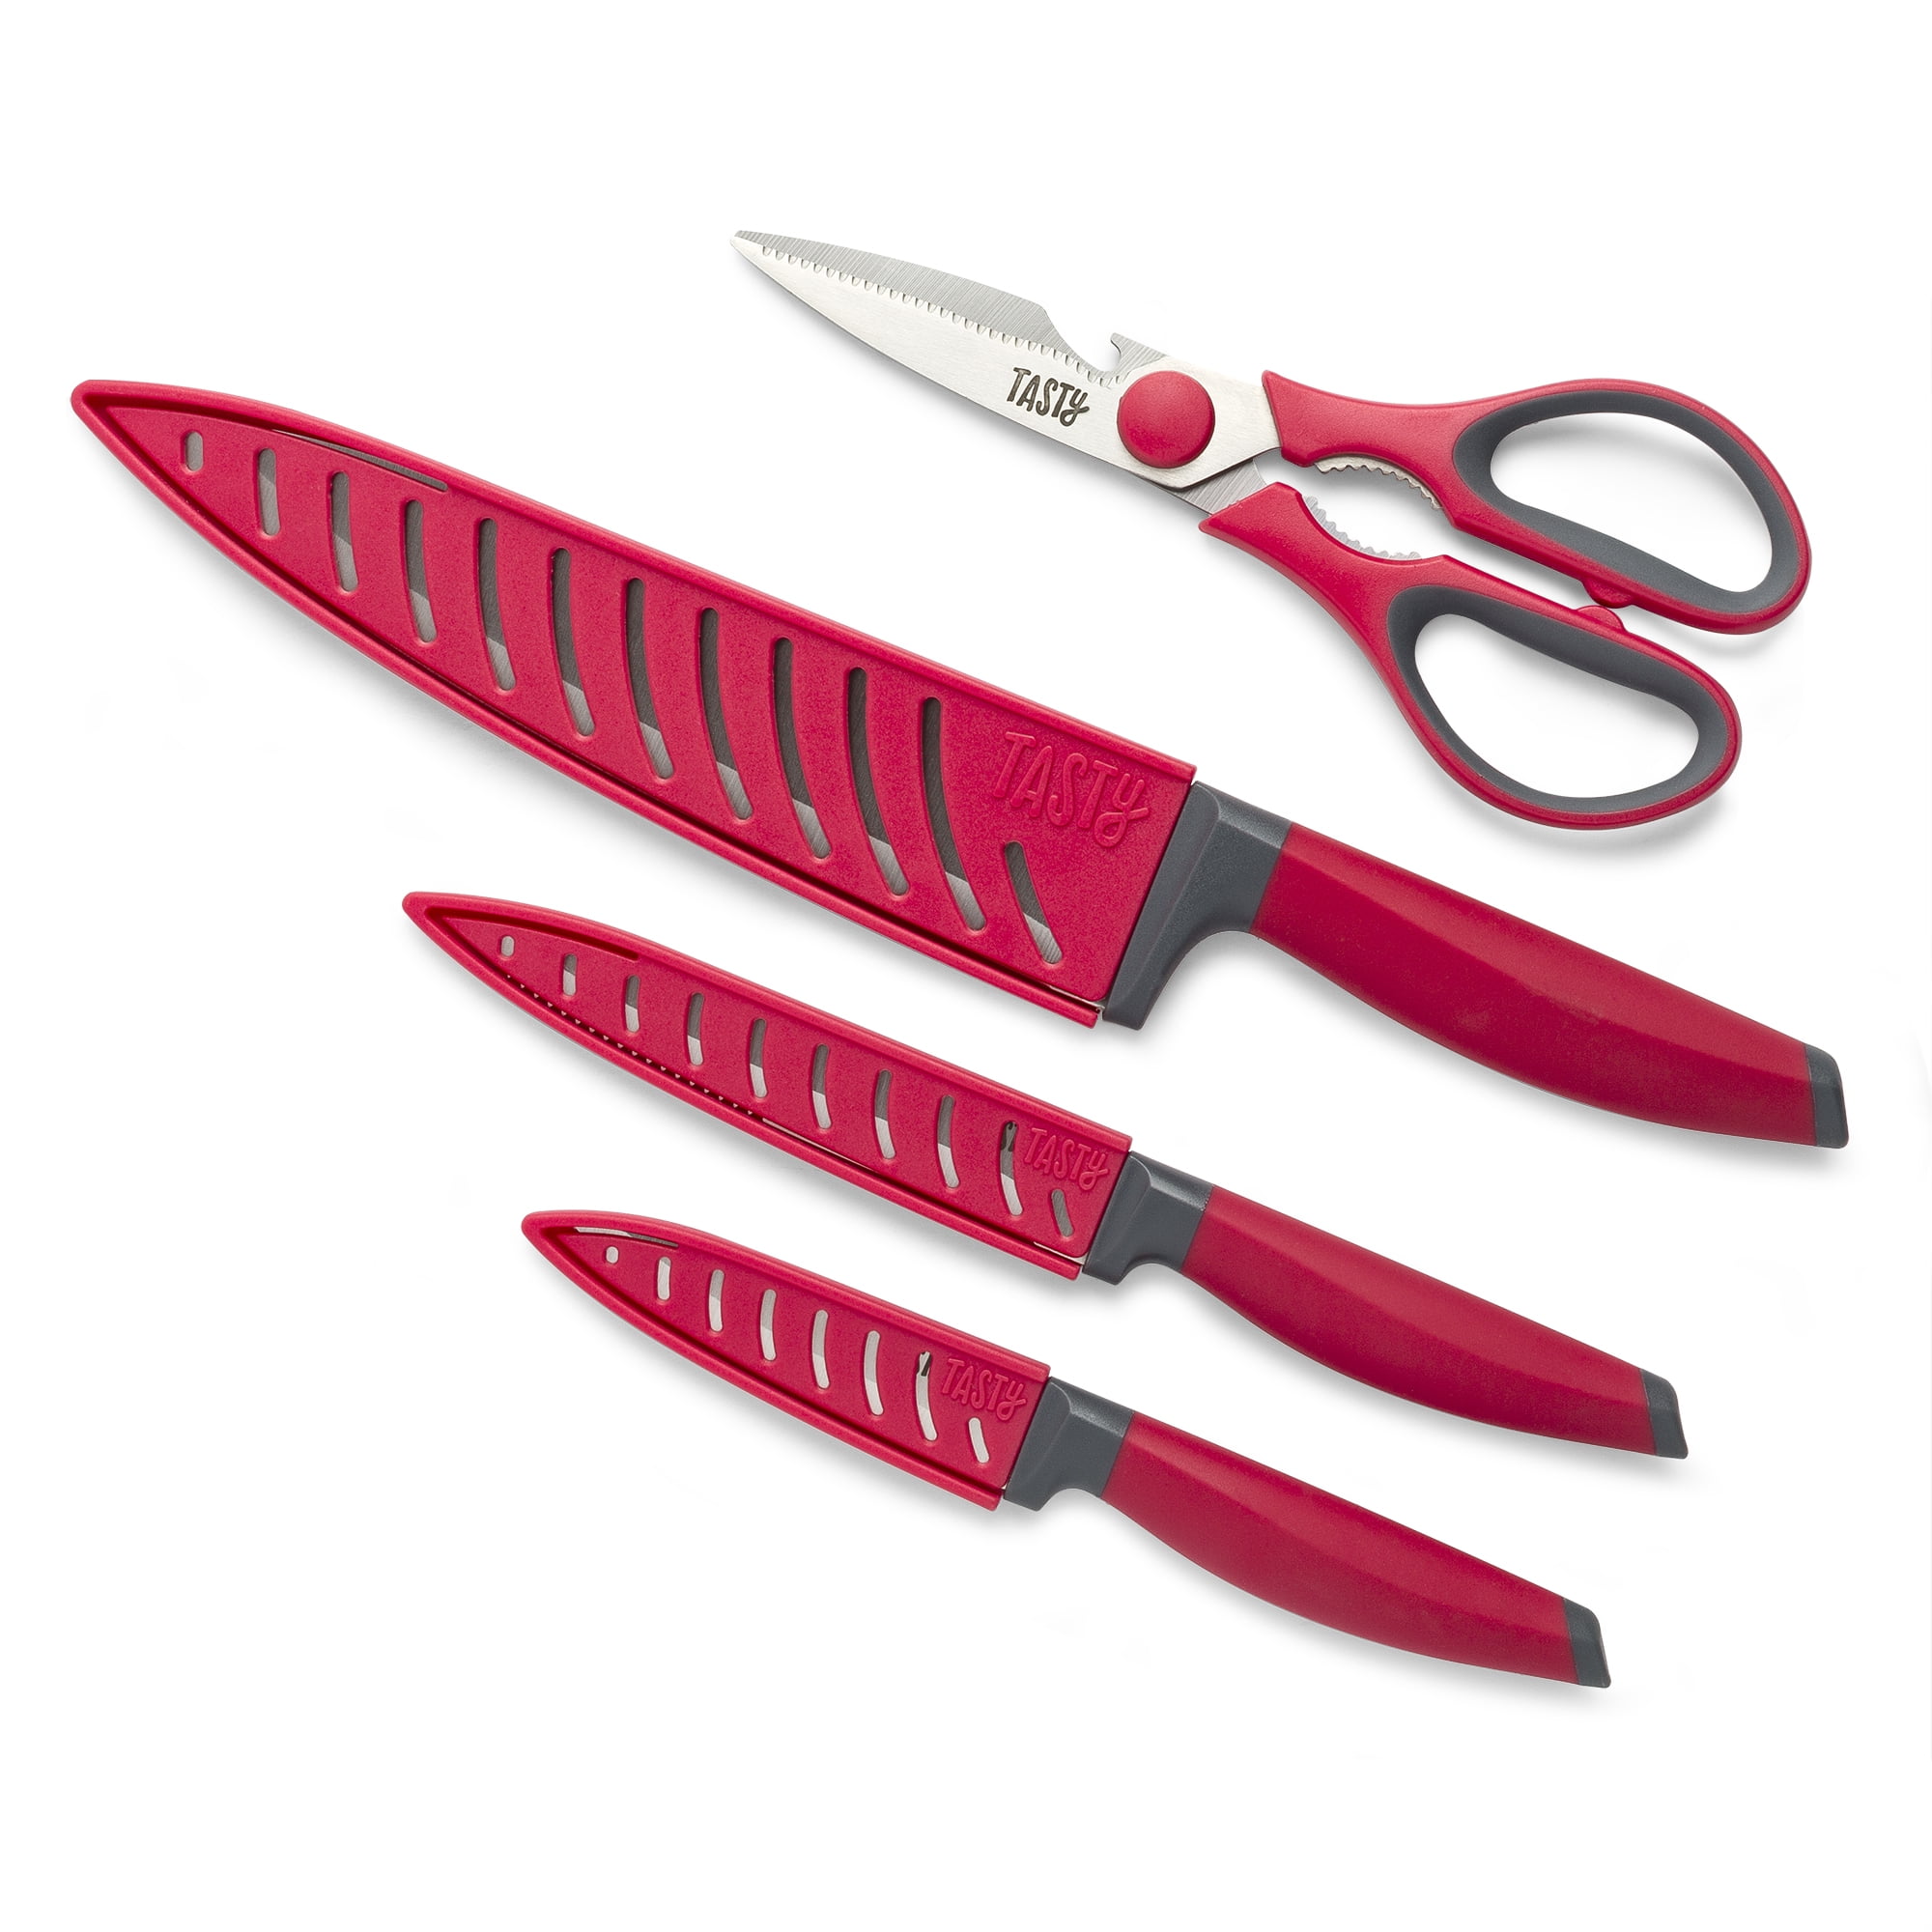 Maarten Kitchen Knives Set - 4 Piece Stainless Steel Chef Knife Set with Sheath - Boxed Knife Sets Gifts for Family (Red)